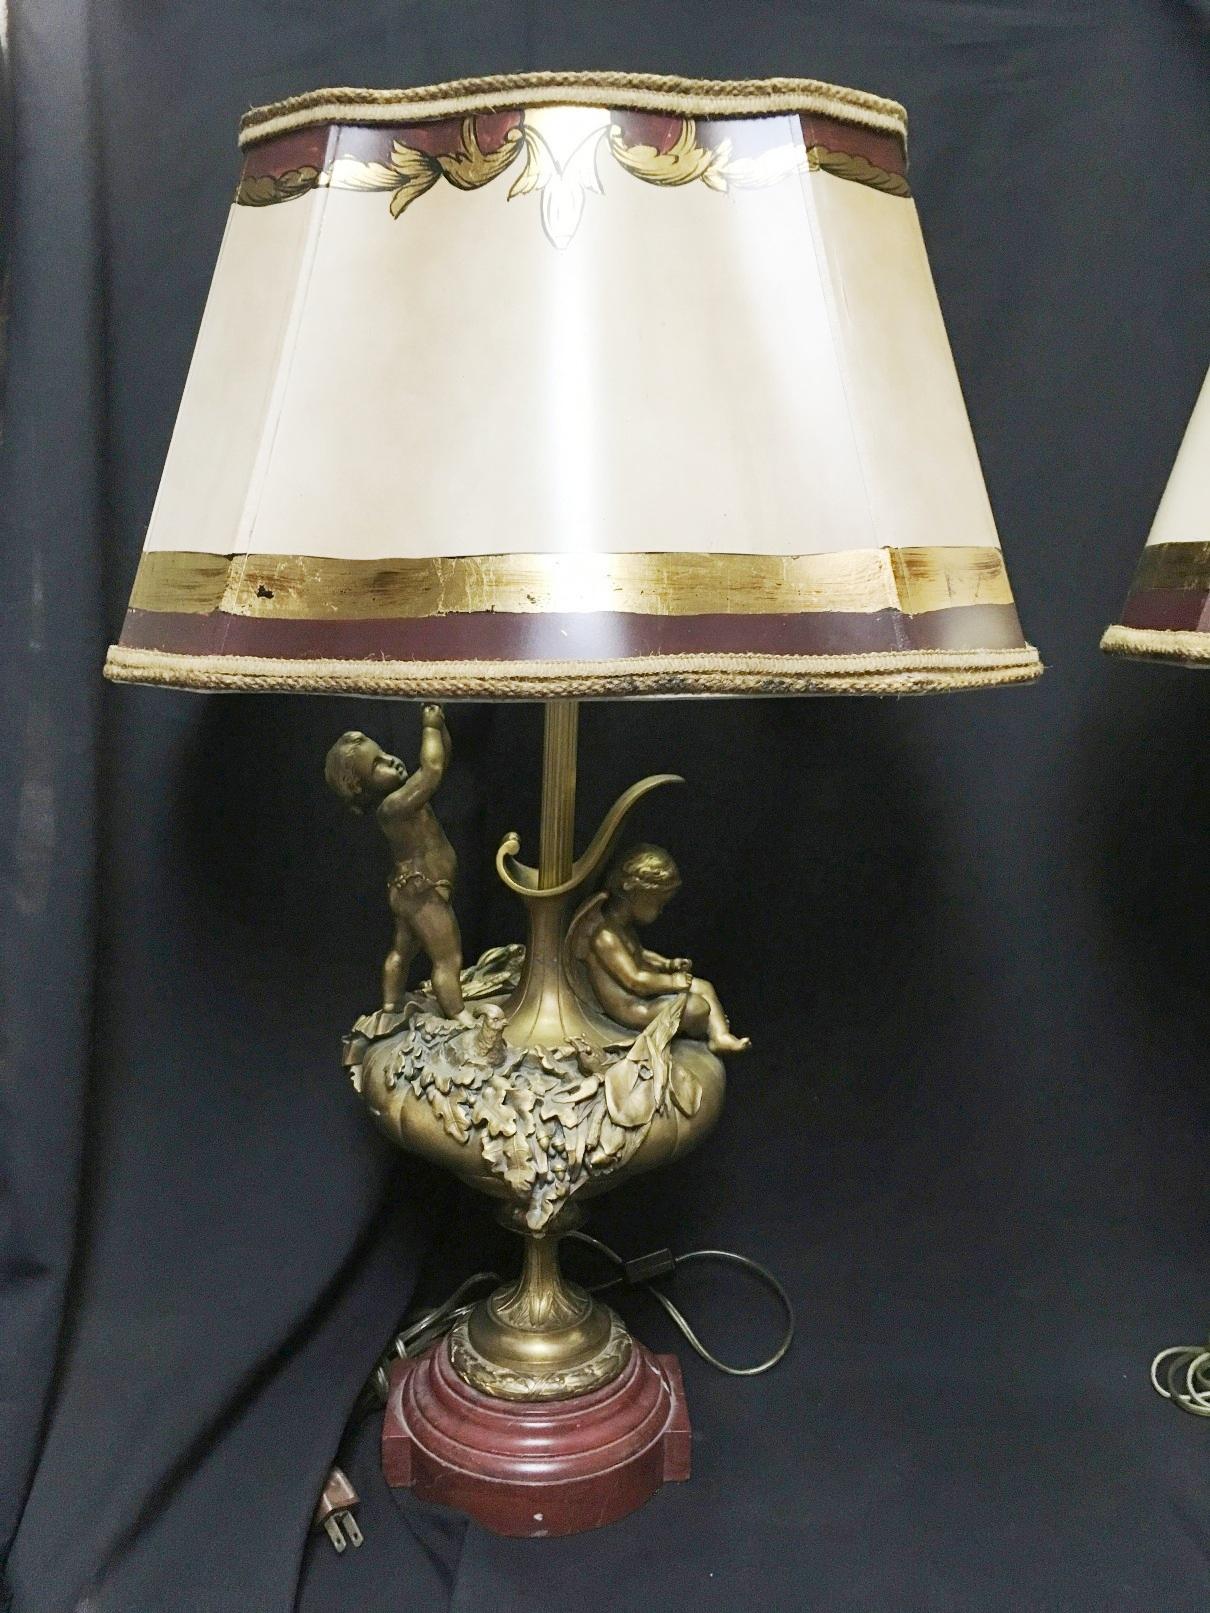 Outstanding opposing pair of 19th century French Louis XVI style ormolu lamps with rouge marble bases.
With parcel gilt and paint decorated faux parchment shade.

Each ormolu lamp depicting a seated cupid and a standing putto on ewer-form body